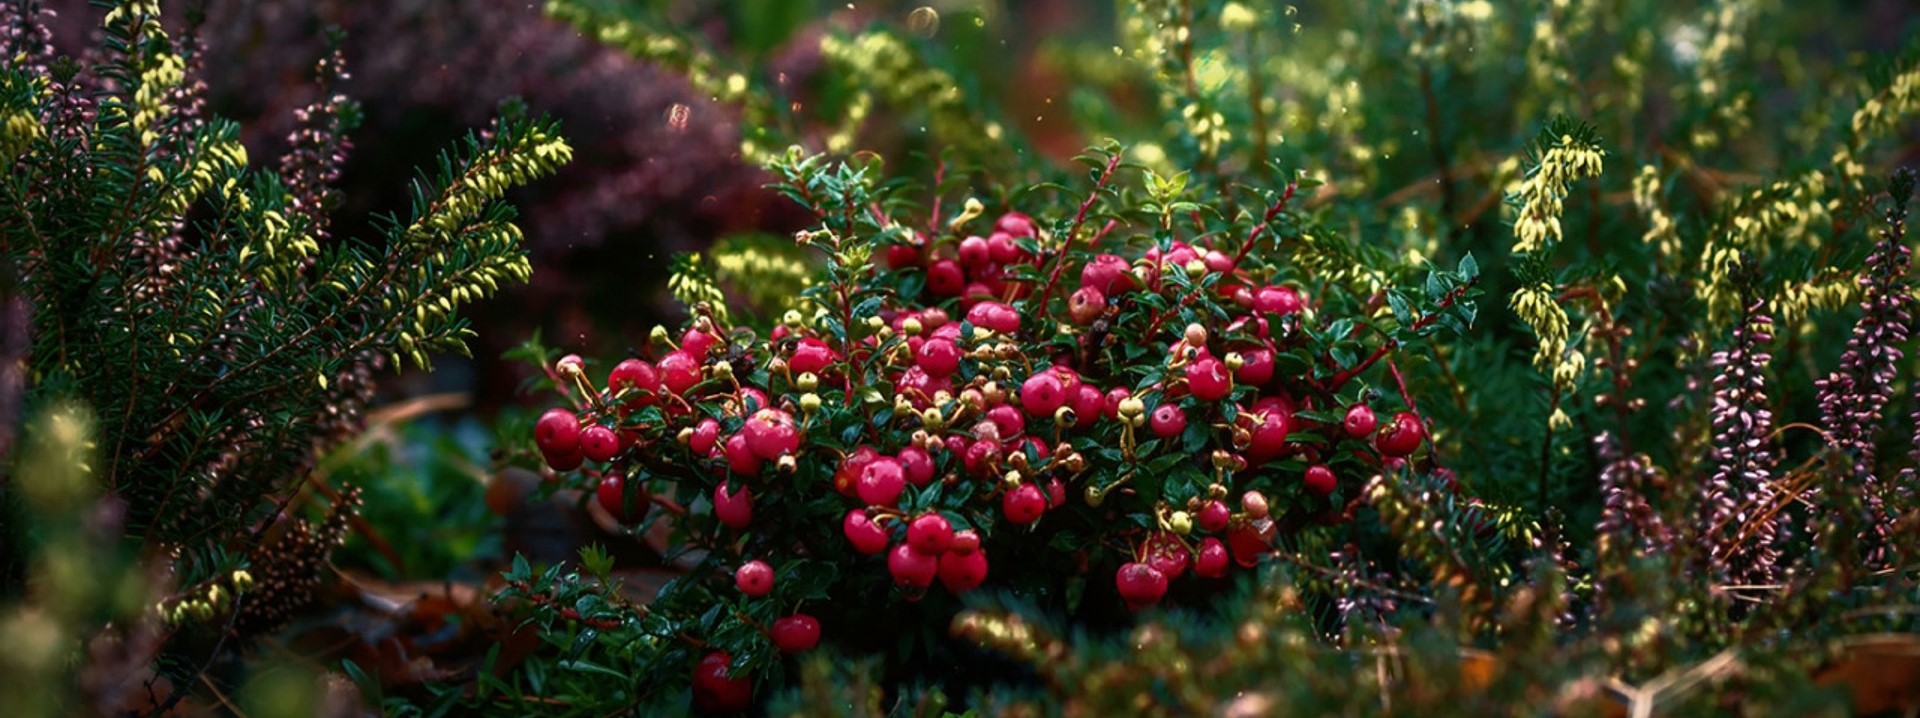 Small red berries (possibly low-bush cranberries) are clustered on a plant close to the ground. Herbs and other plants grow aound it in a soft, afternoon or early morning light.